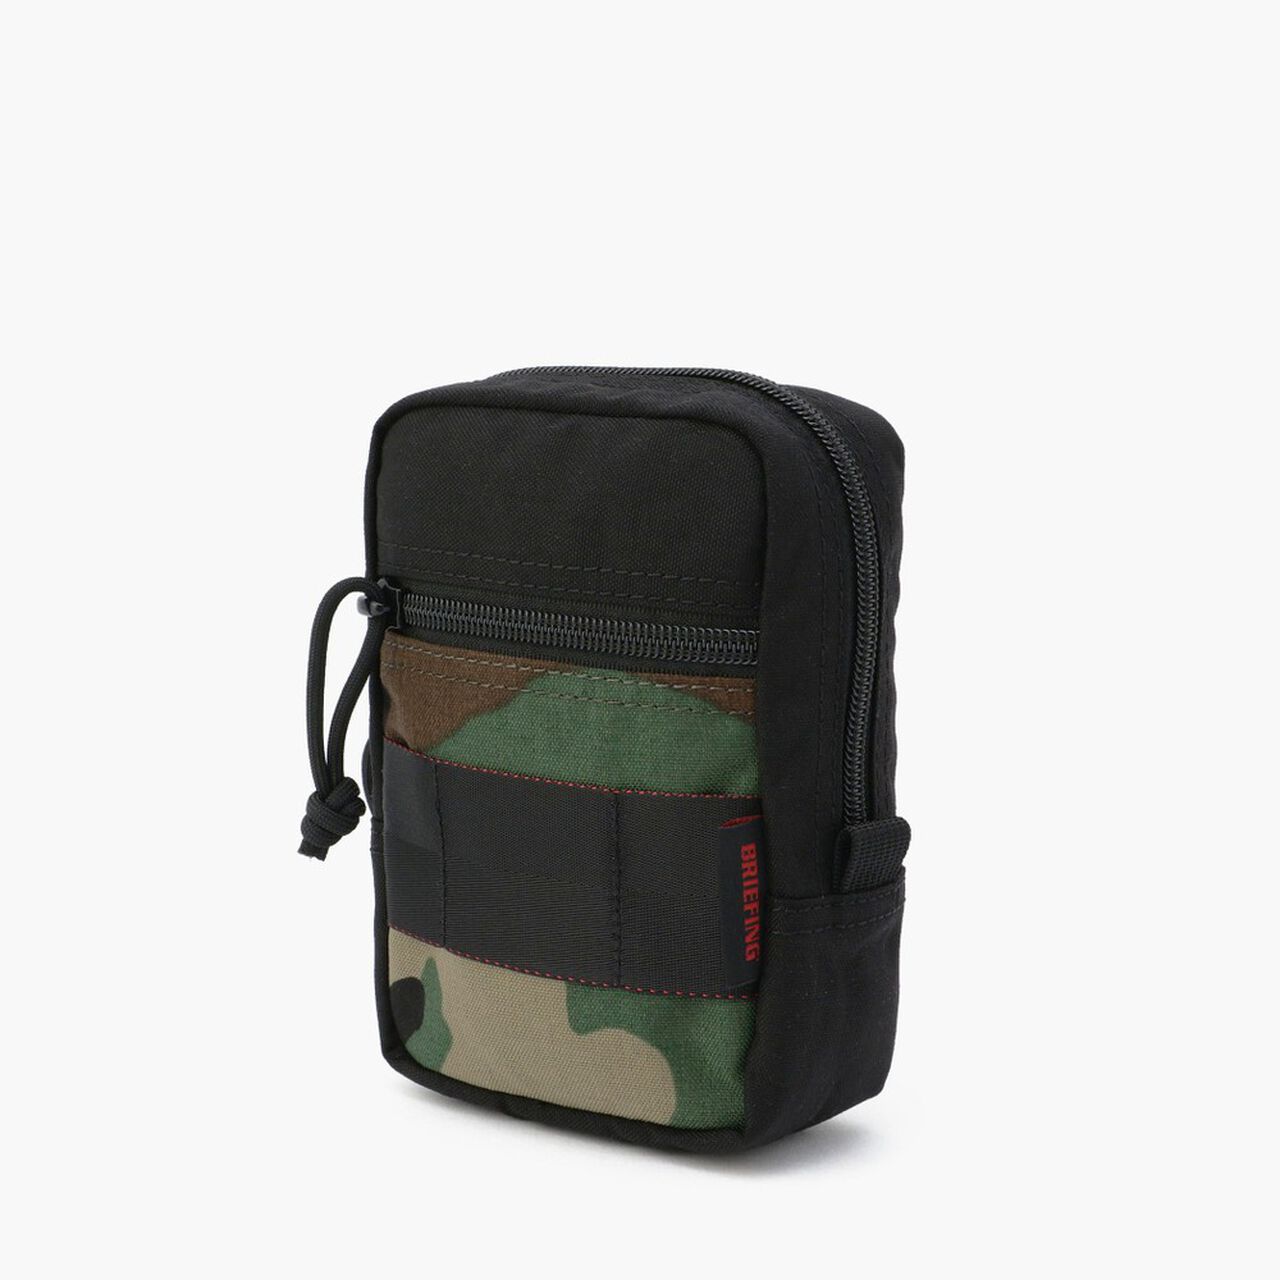 AT-BOX POUCH M CAMO MIX,, large image number 1